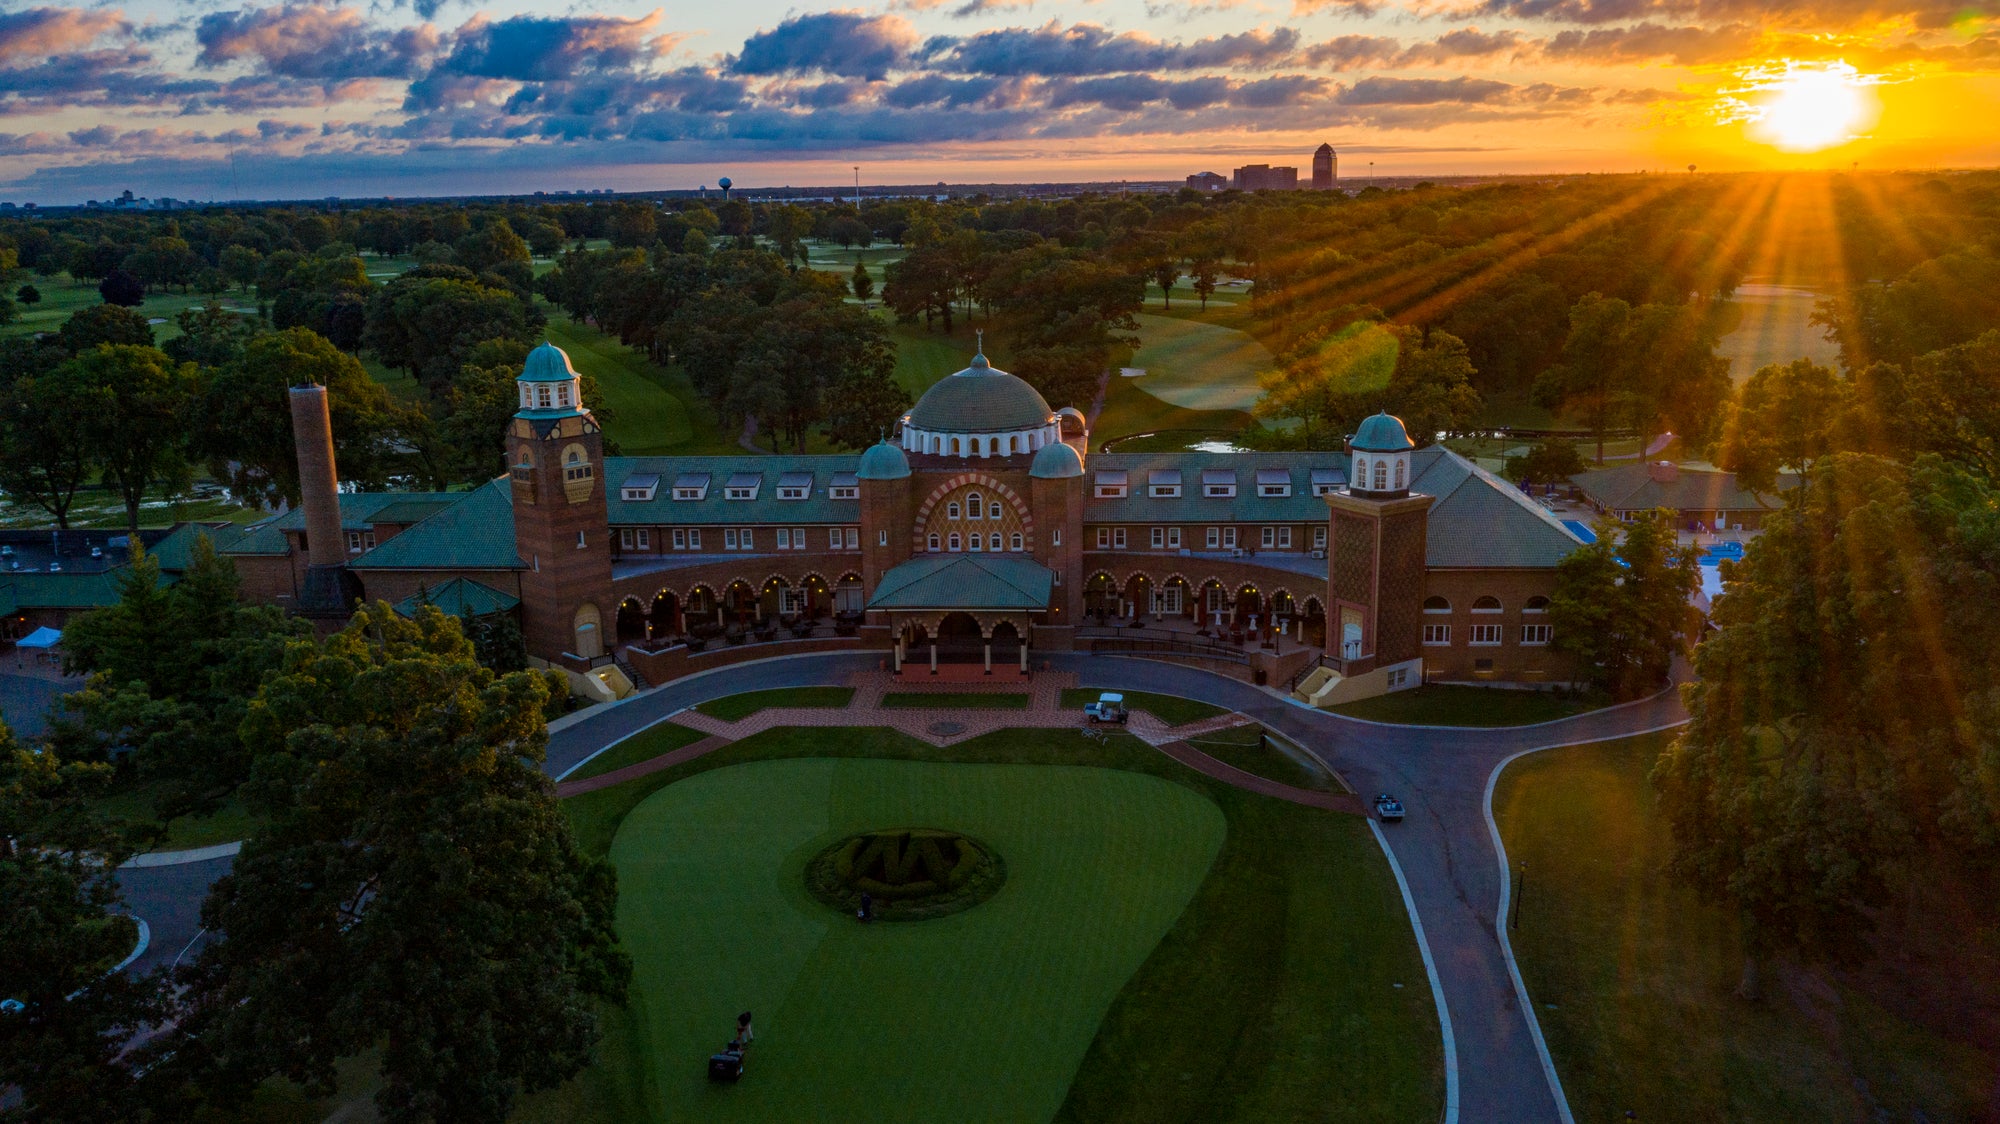 Medinah #1 - The Clubhouse and Sunrise